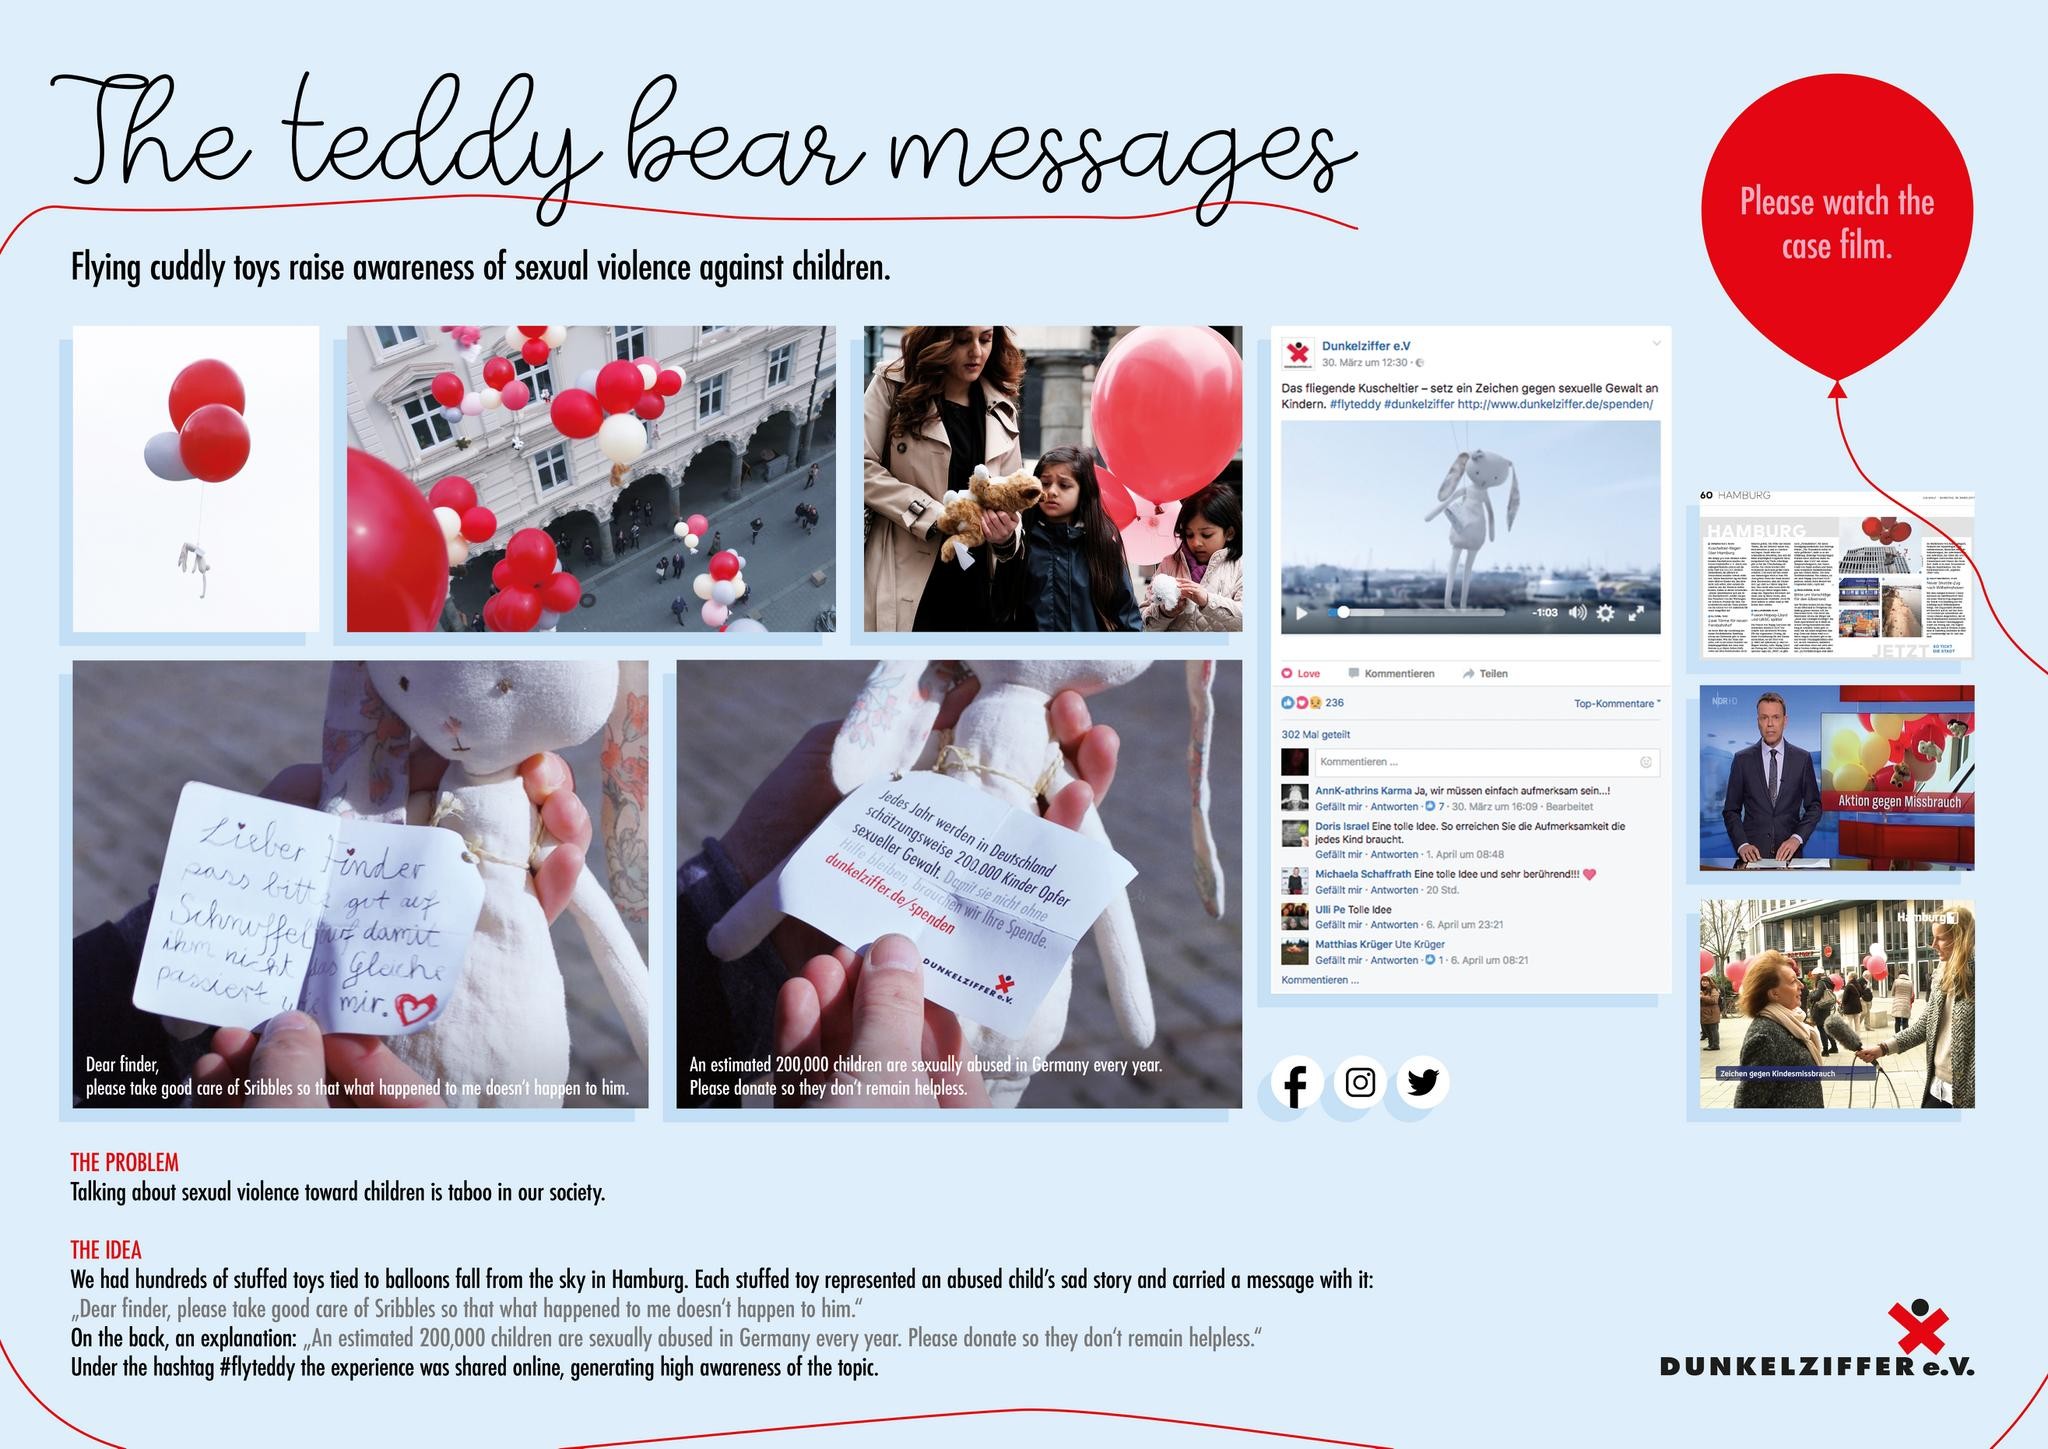 The teddy bear messages